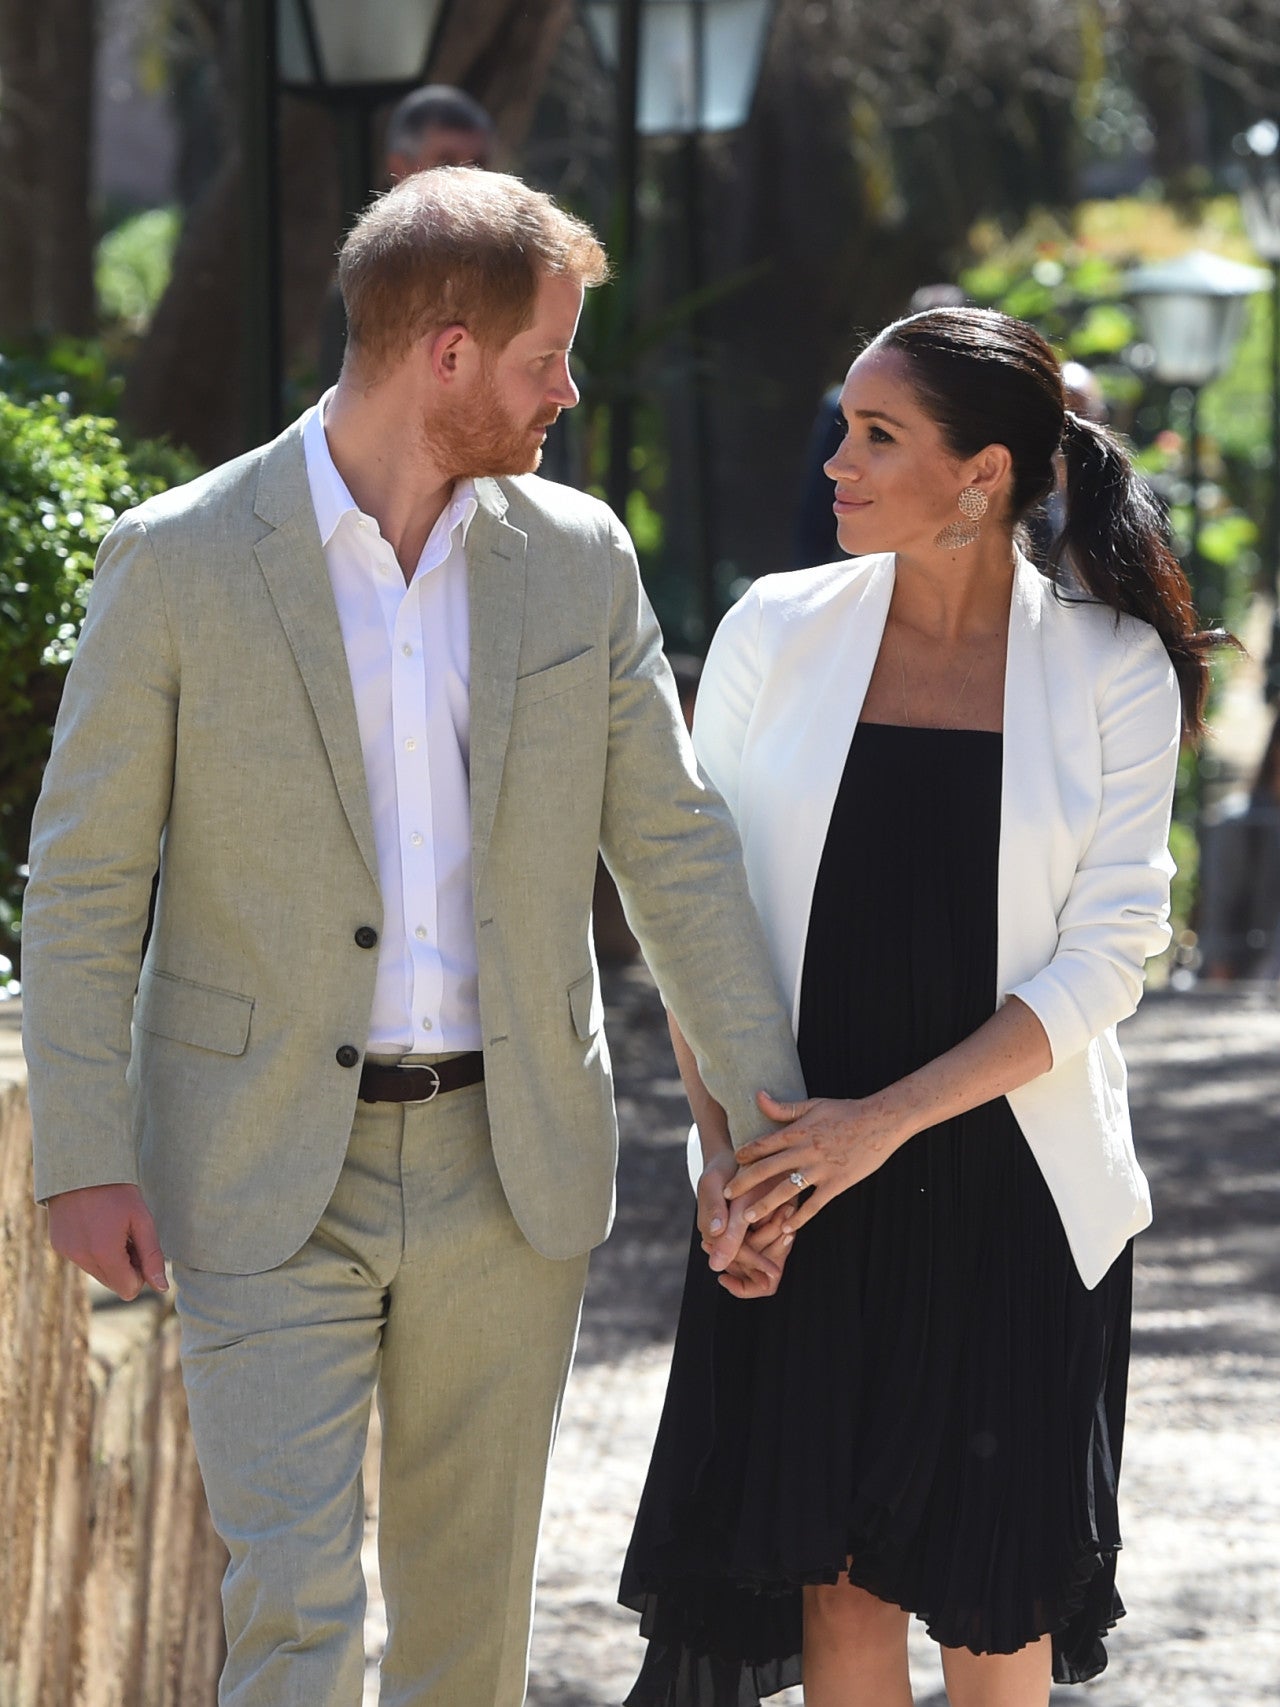 Meghan and Harry Delayed Their Move for a Very Relatable Reason